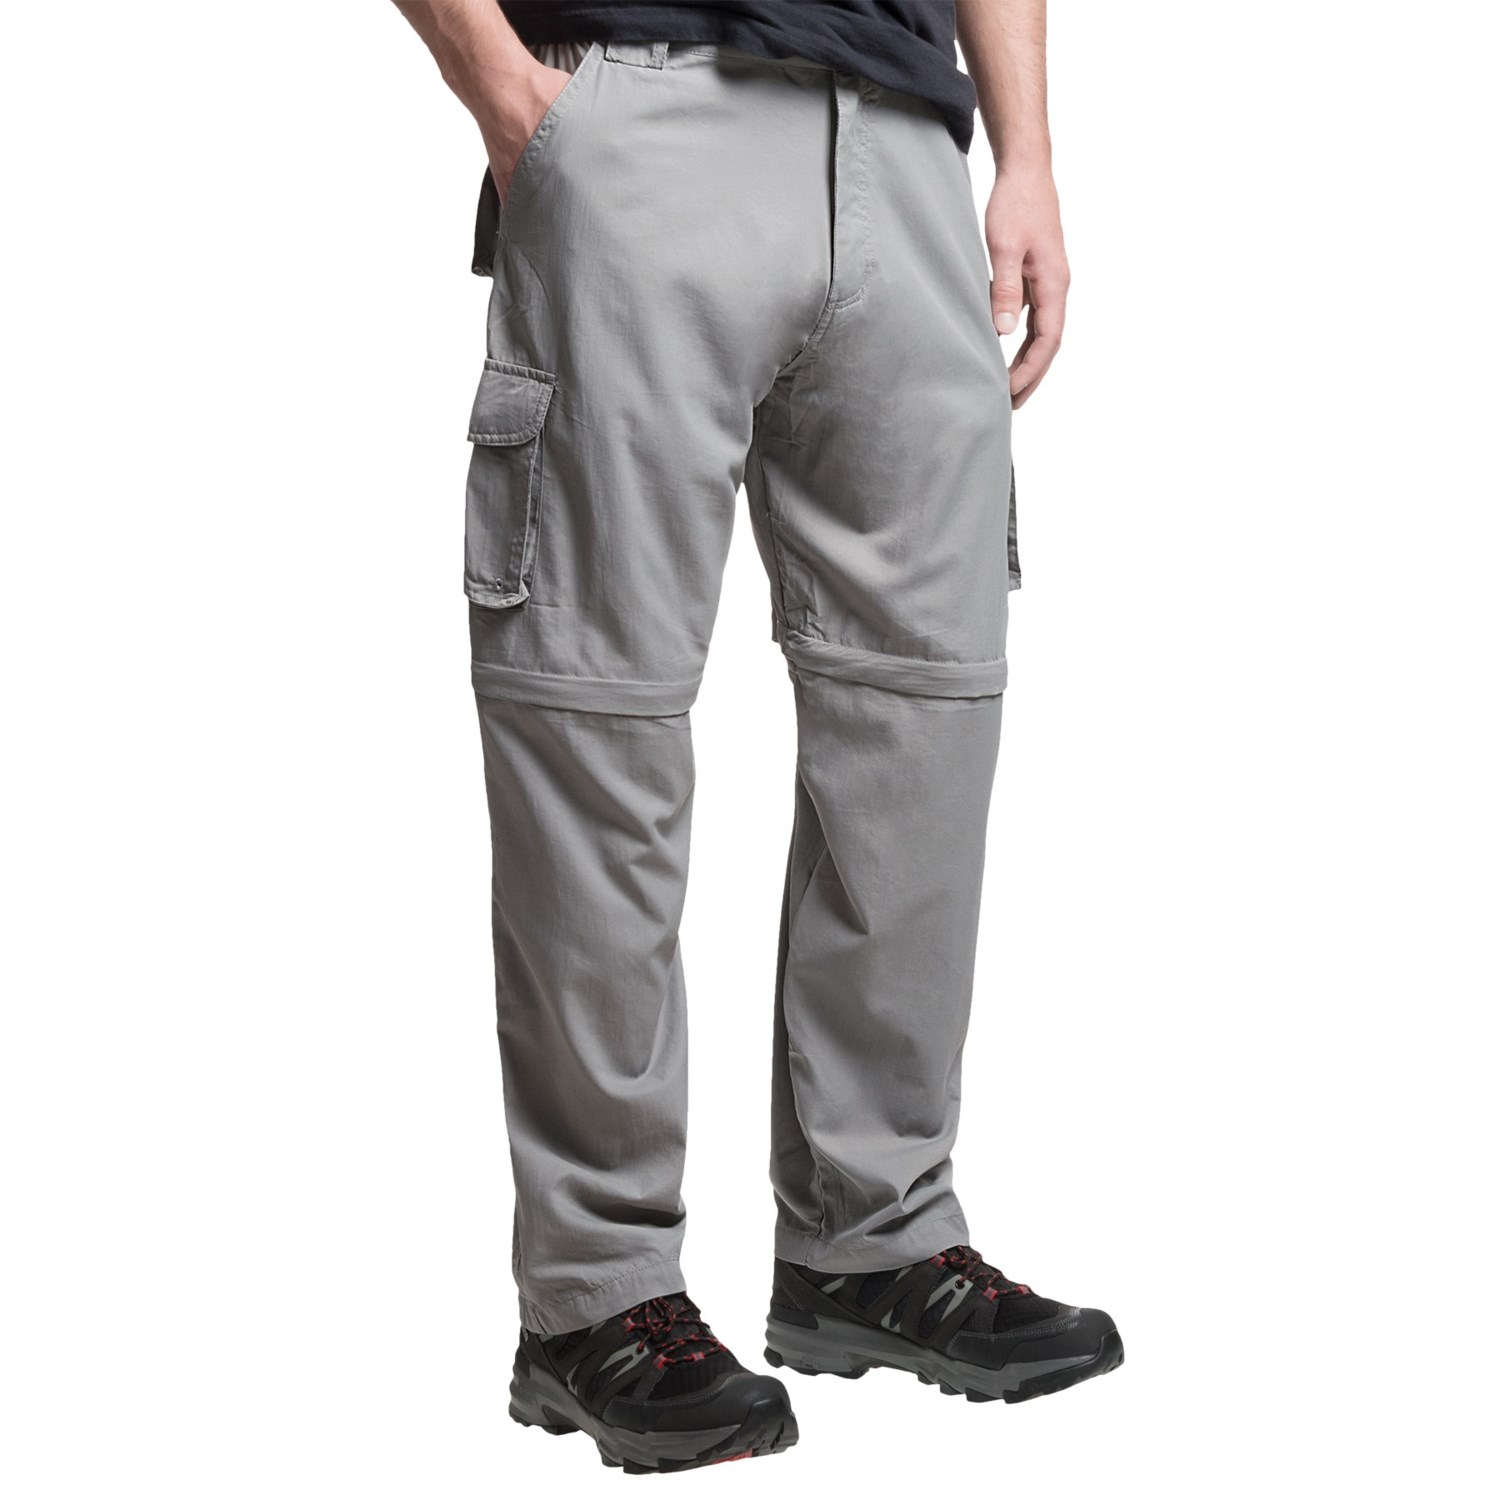 Dakota Grizzly Belted Cargo Pants (For Men) - Save 49%